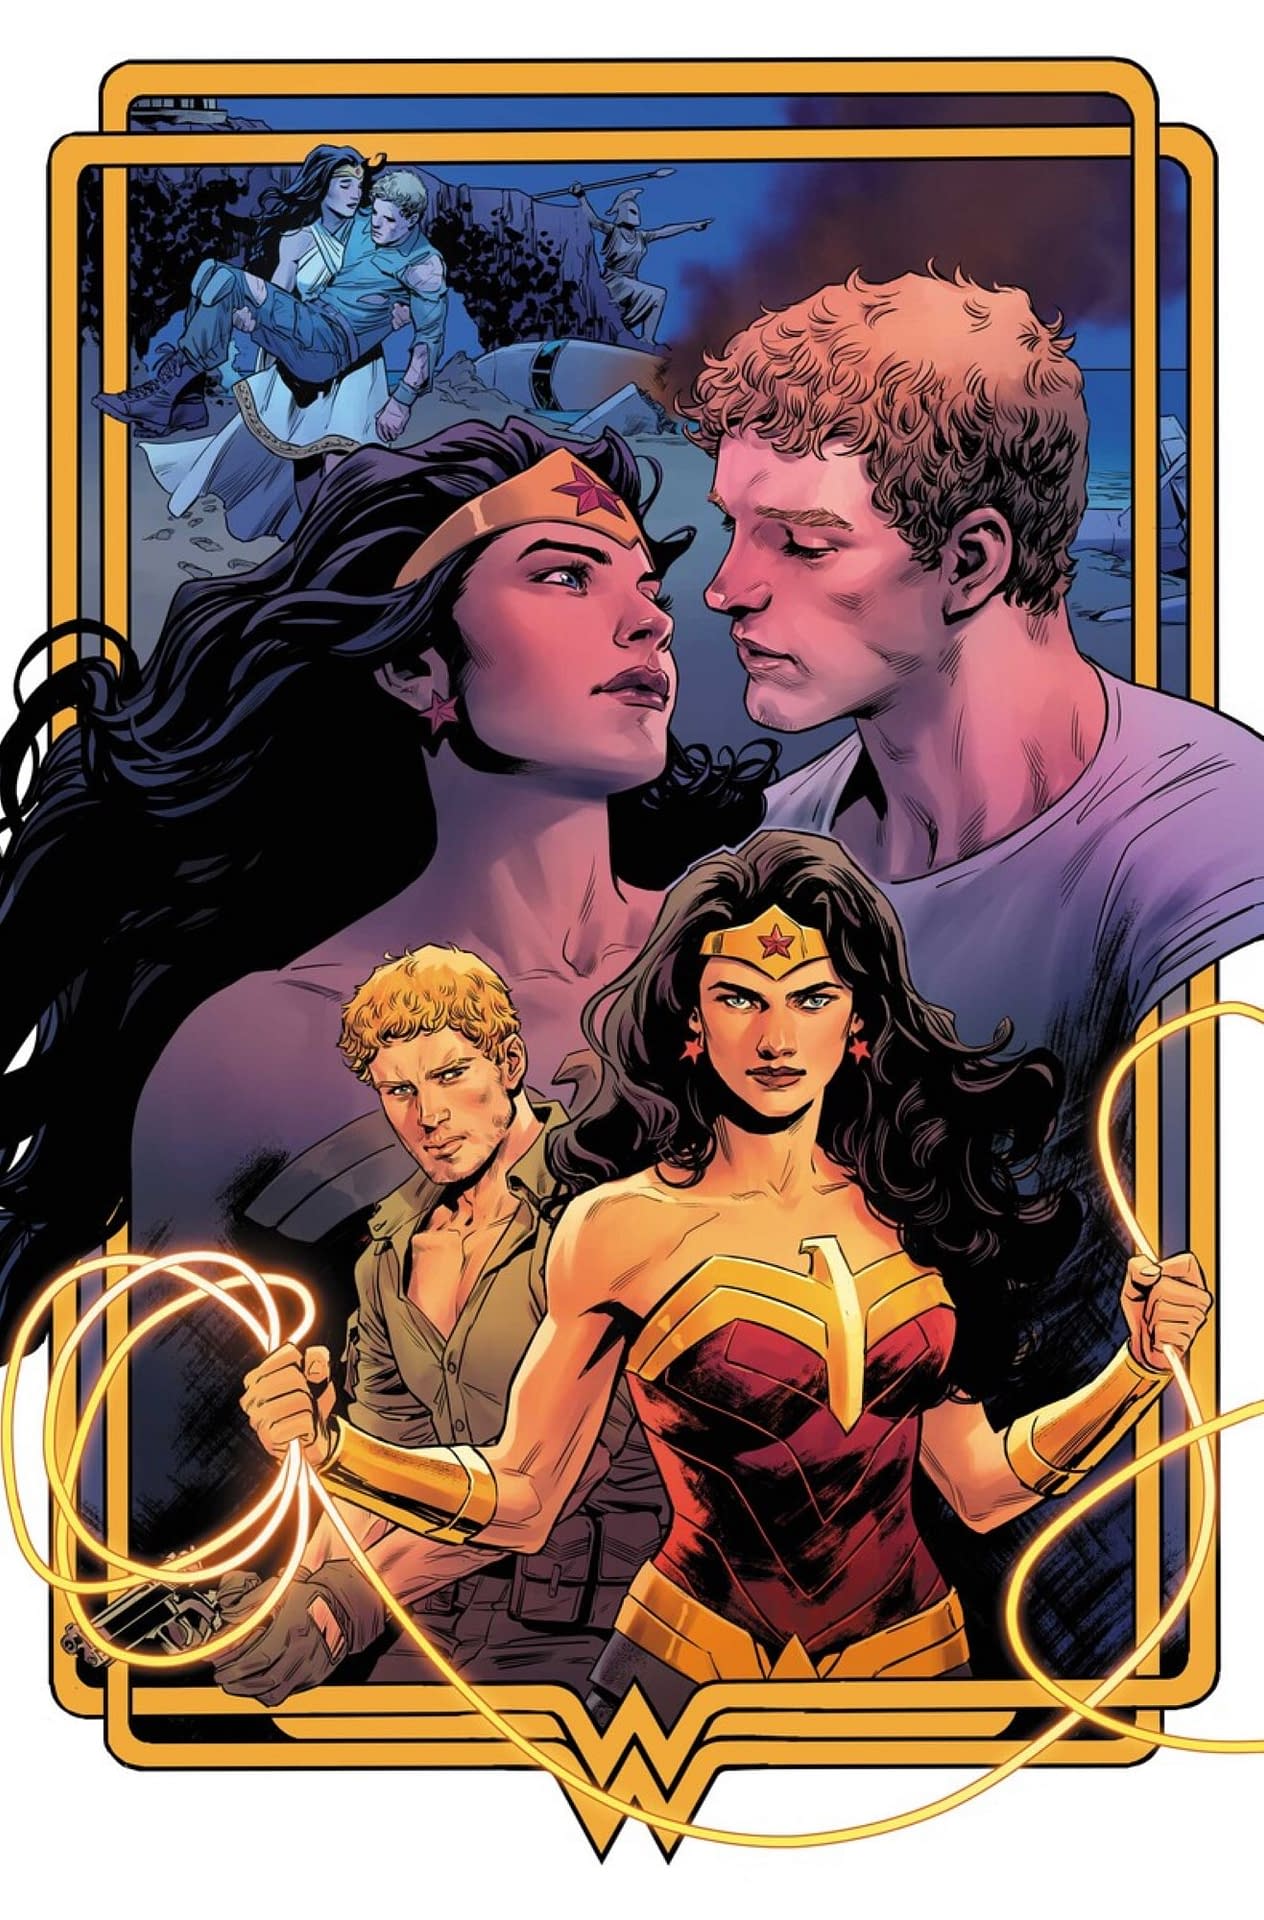 DC Publishes 12 Wonder Woman Comics In October For 80th Anniversary